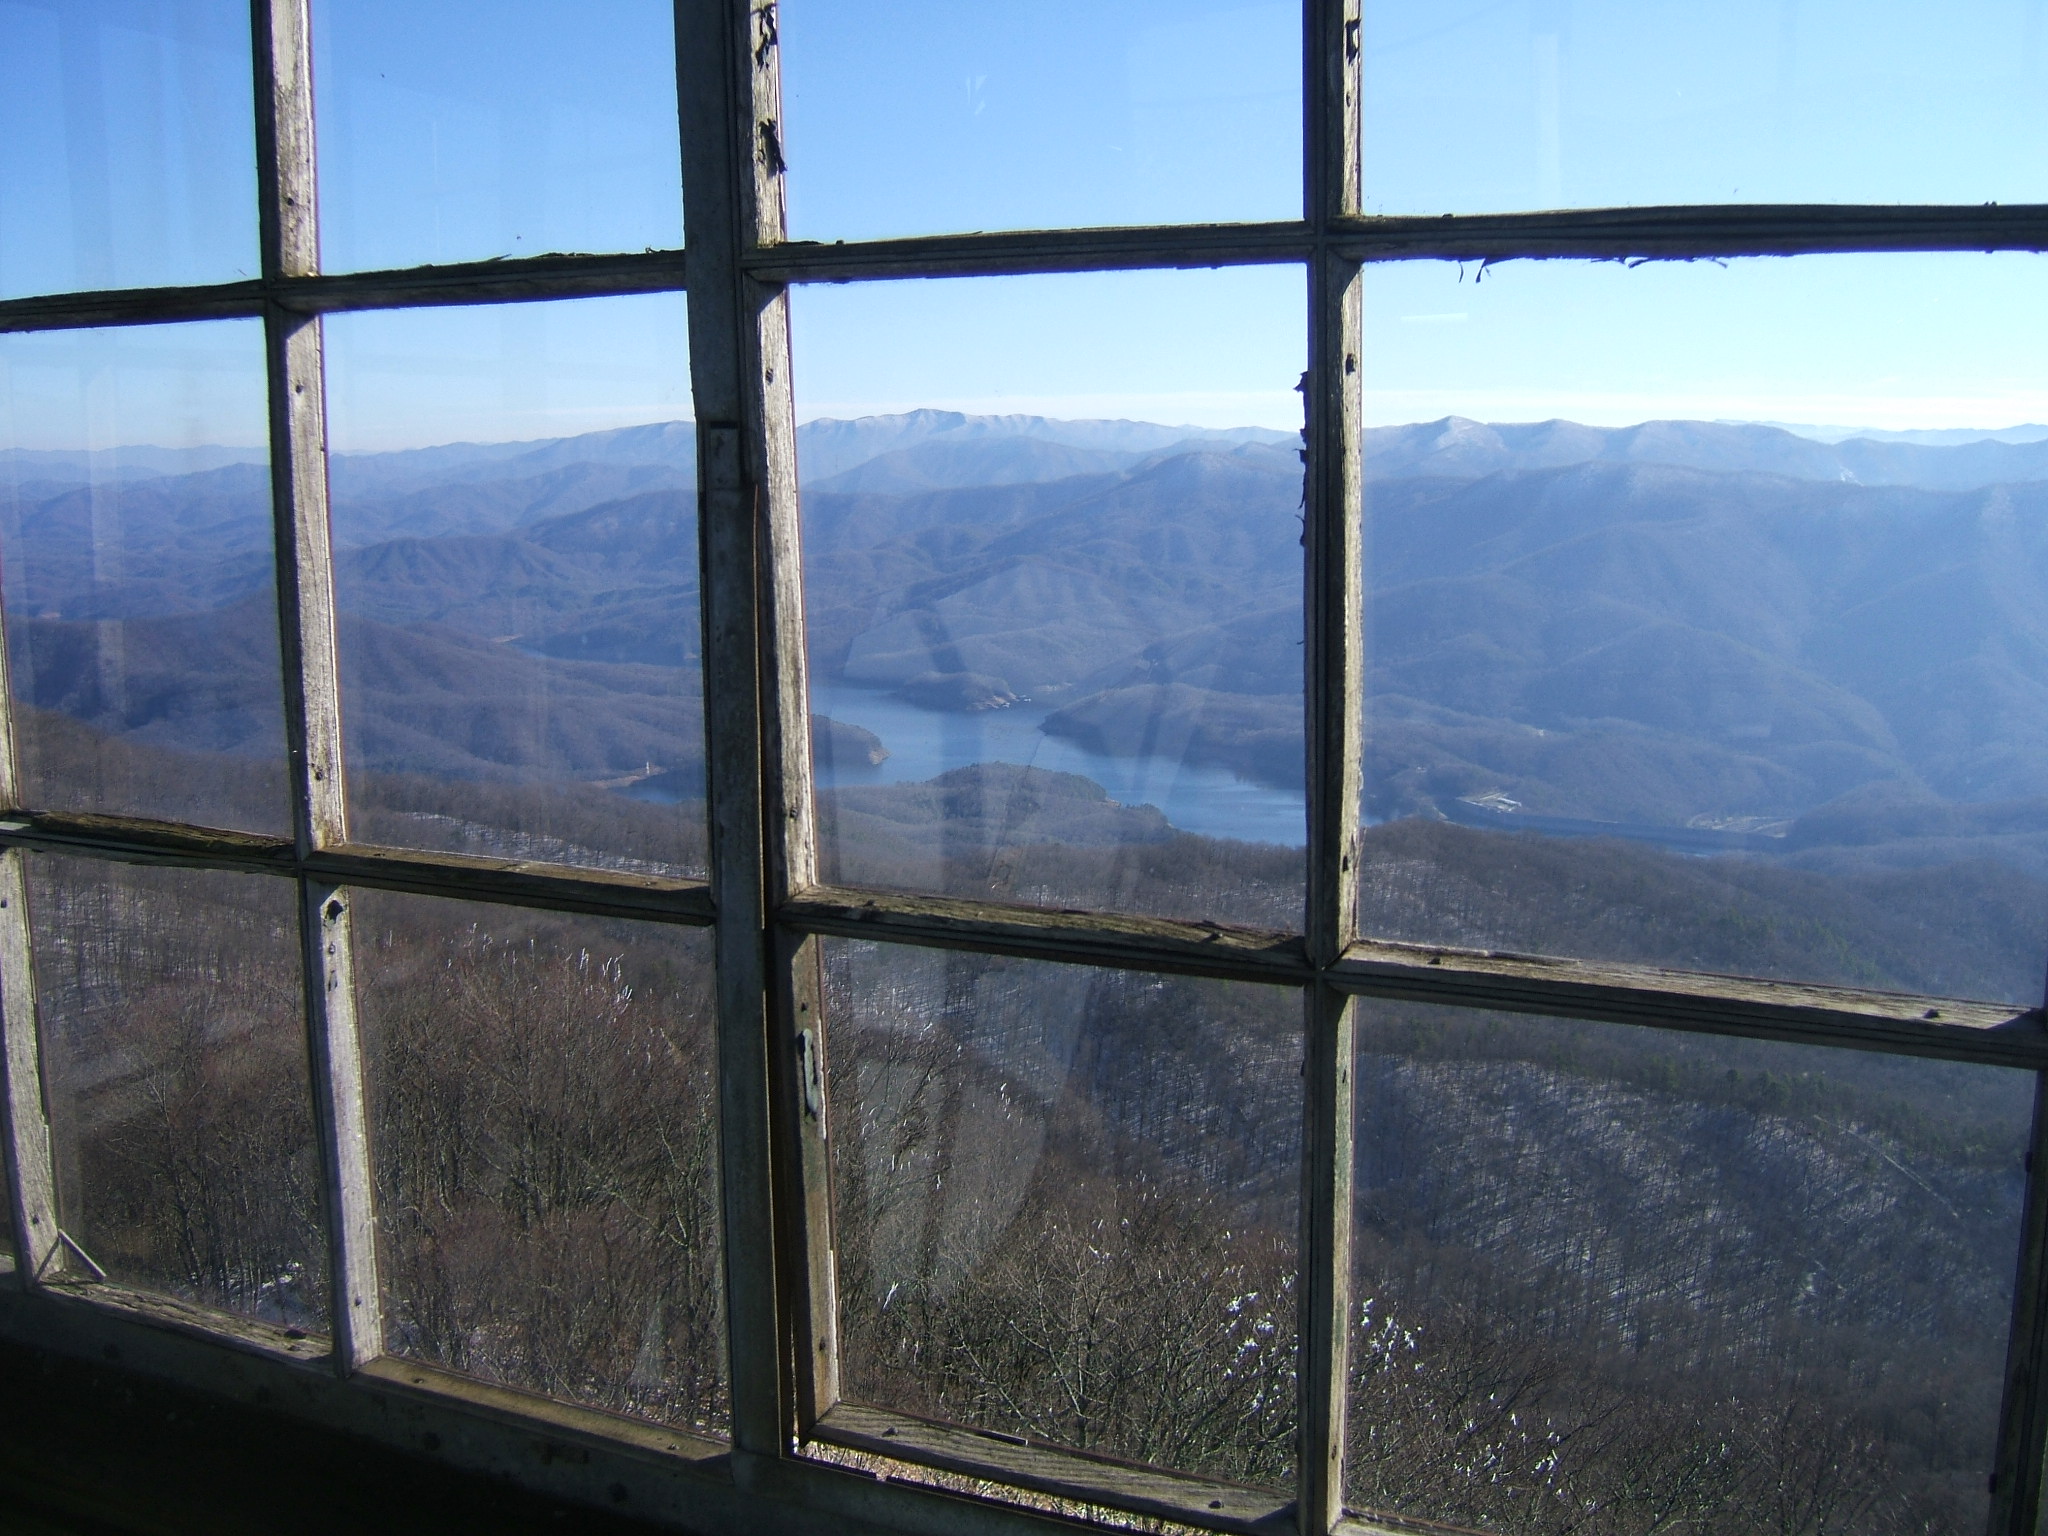 mm 35.2 - View from tower on Shuckstack Mountain. December 2006.  Courtesy mwholmesjr@hotmail.com